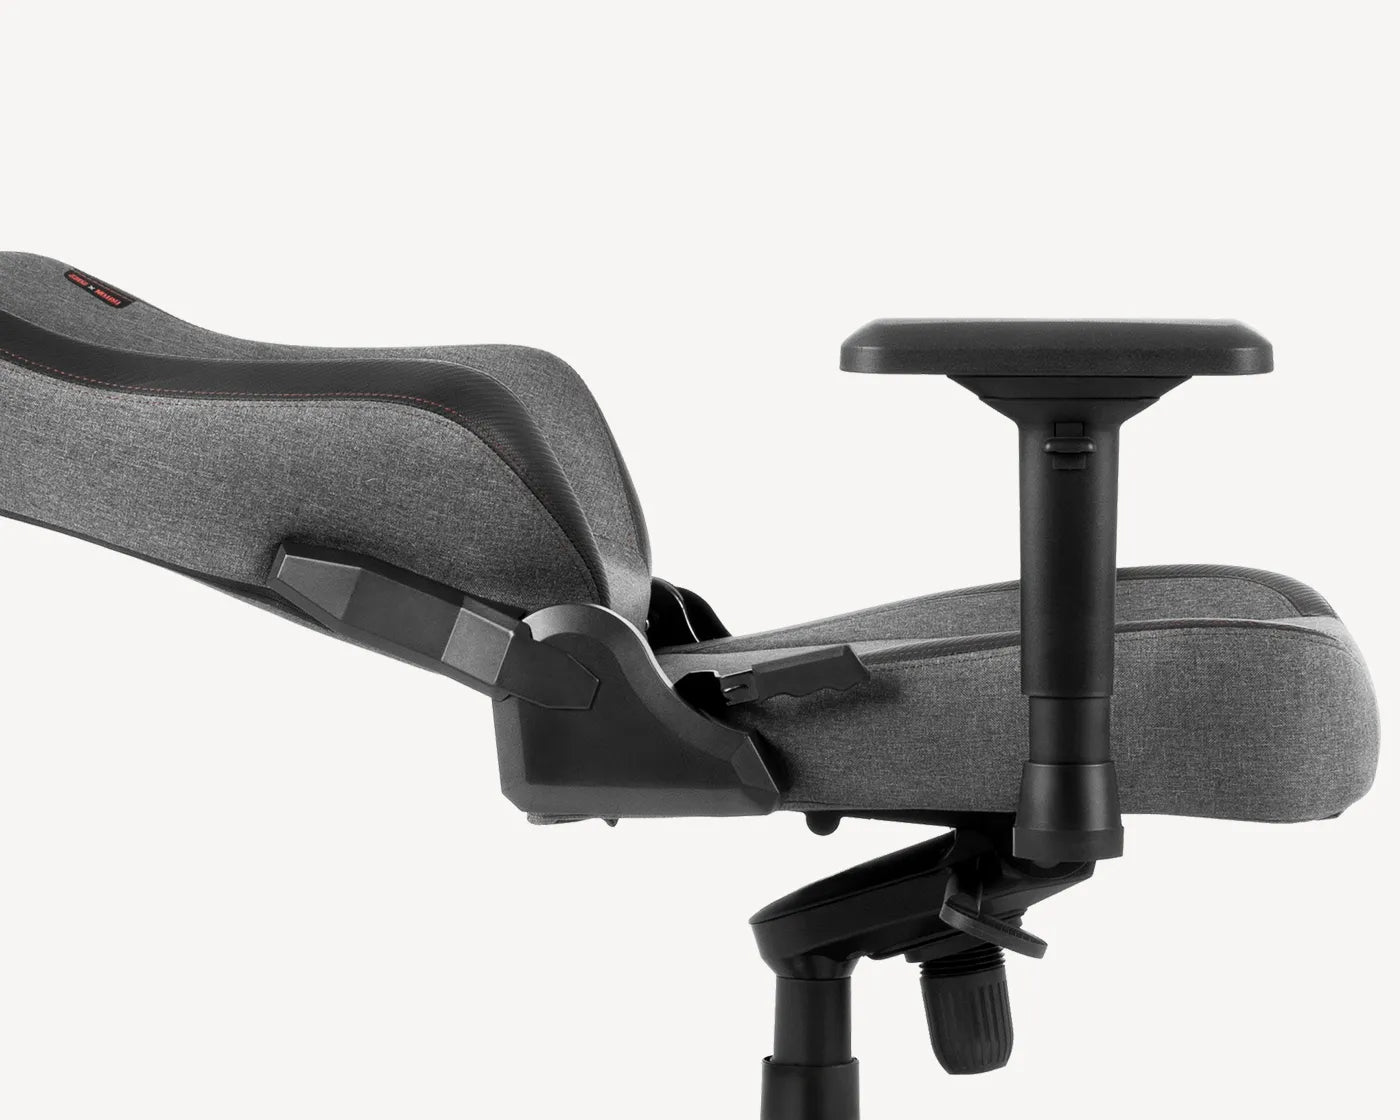 Gaming chair with Synchro Mechanism allowing a recline lock in any position from 90 to 160 degrees, highlighted as a feature by TRITON.